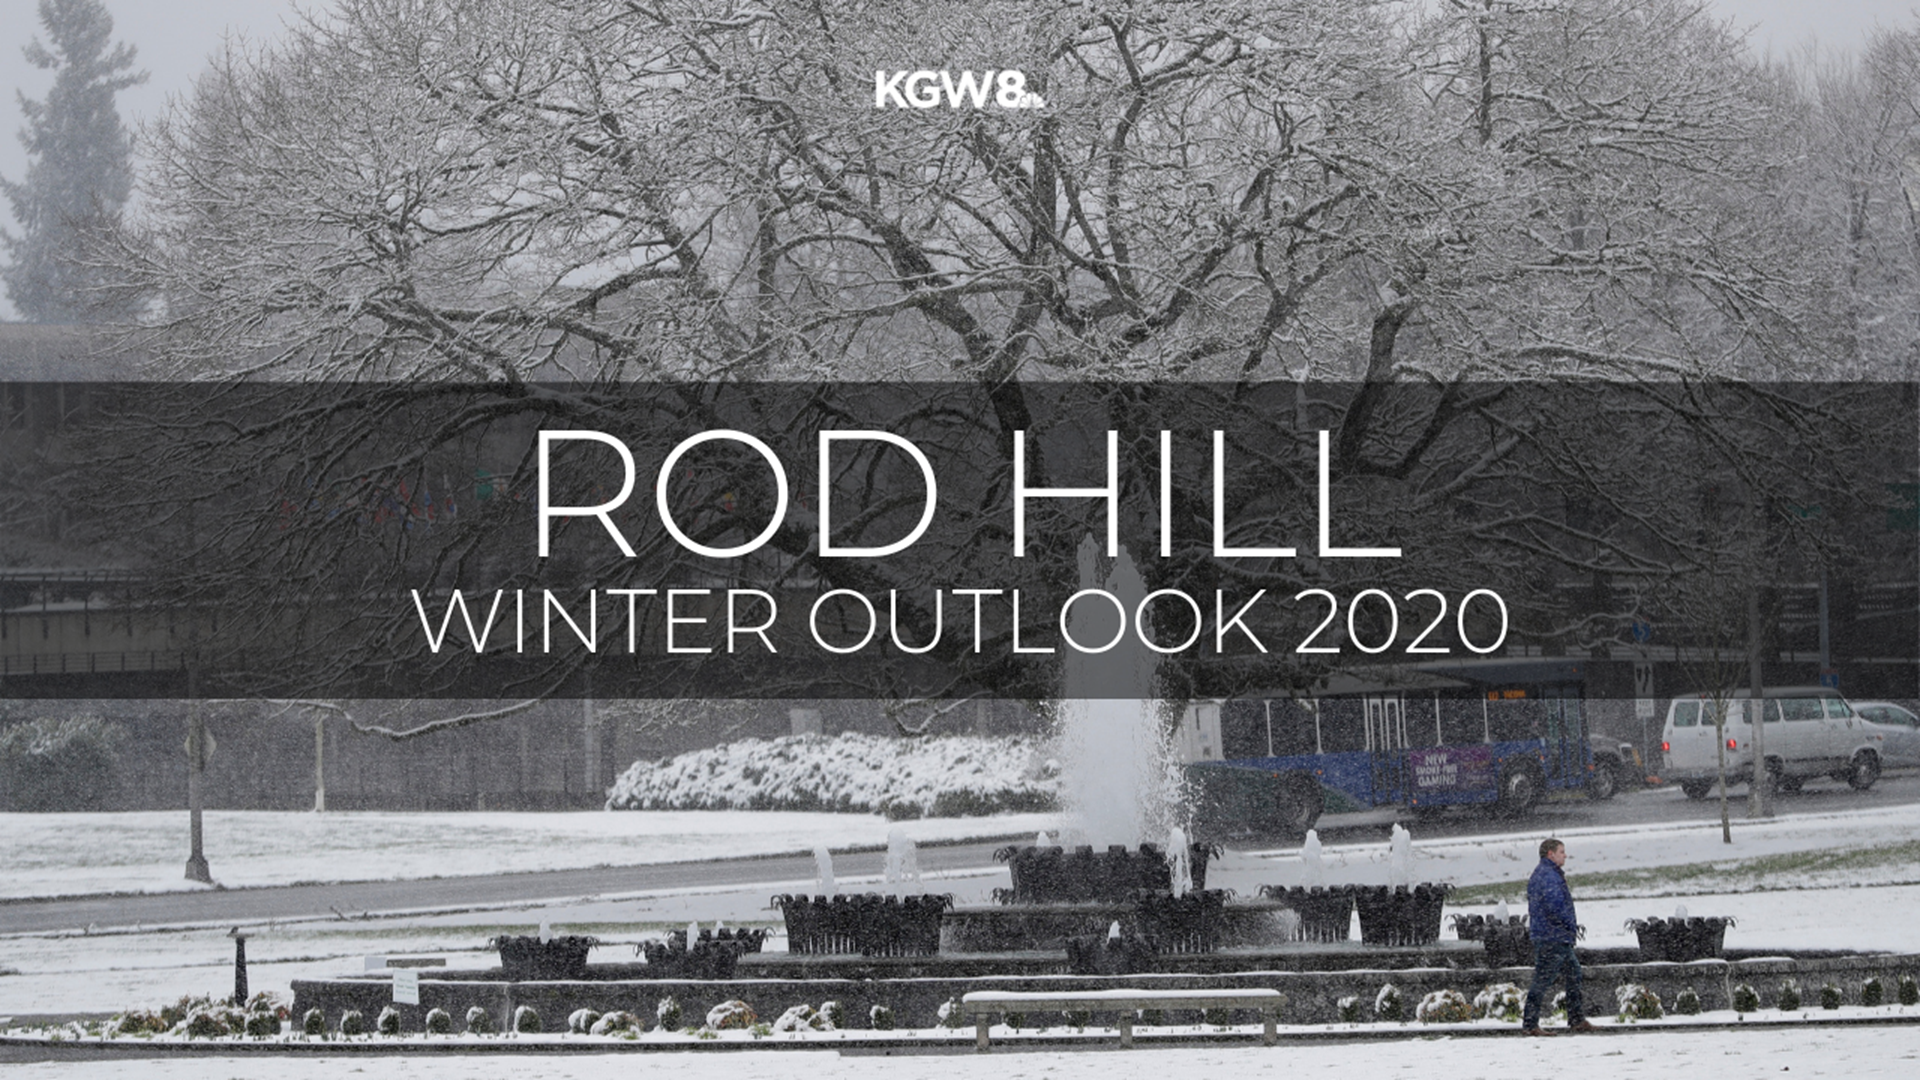 KGW meteorologist Rod Hill says the Portland metro area should expect a wet winter, with above-average rainfall and a good chance of valley snow.